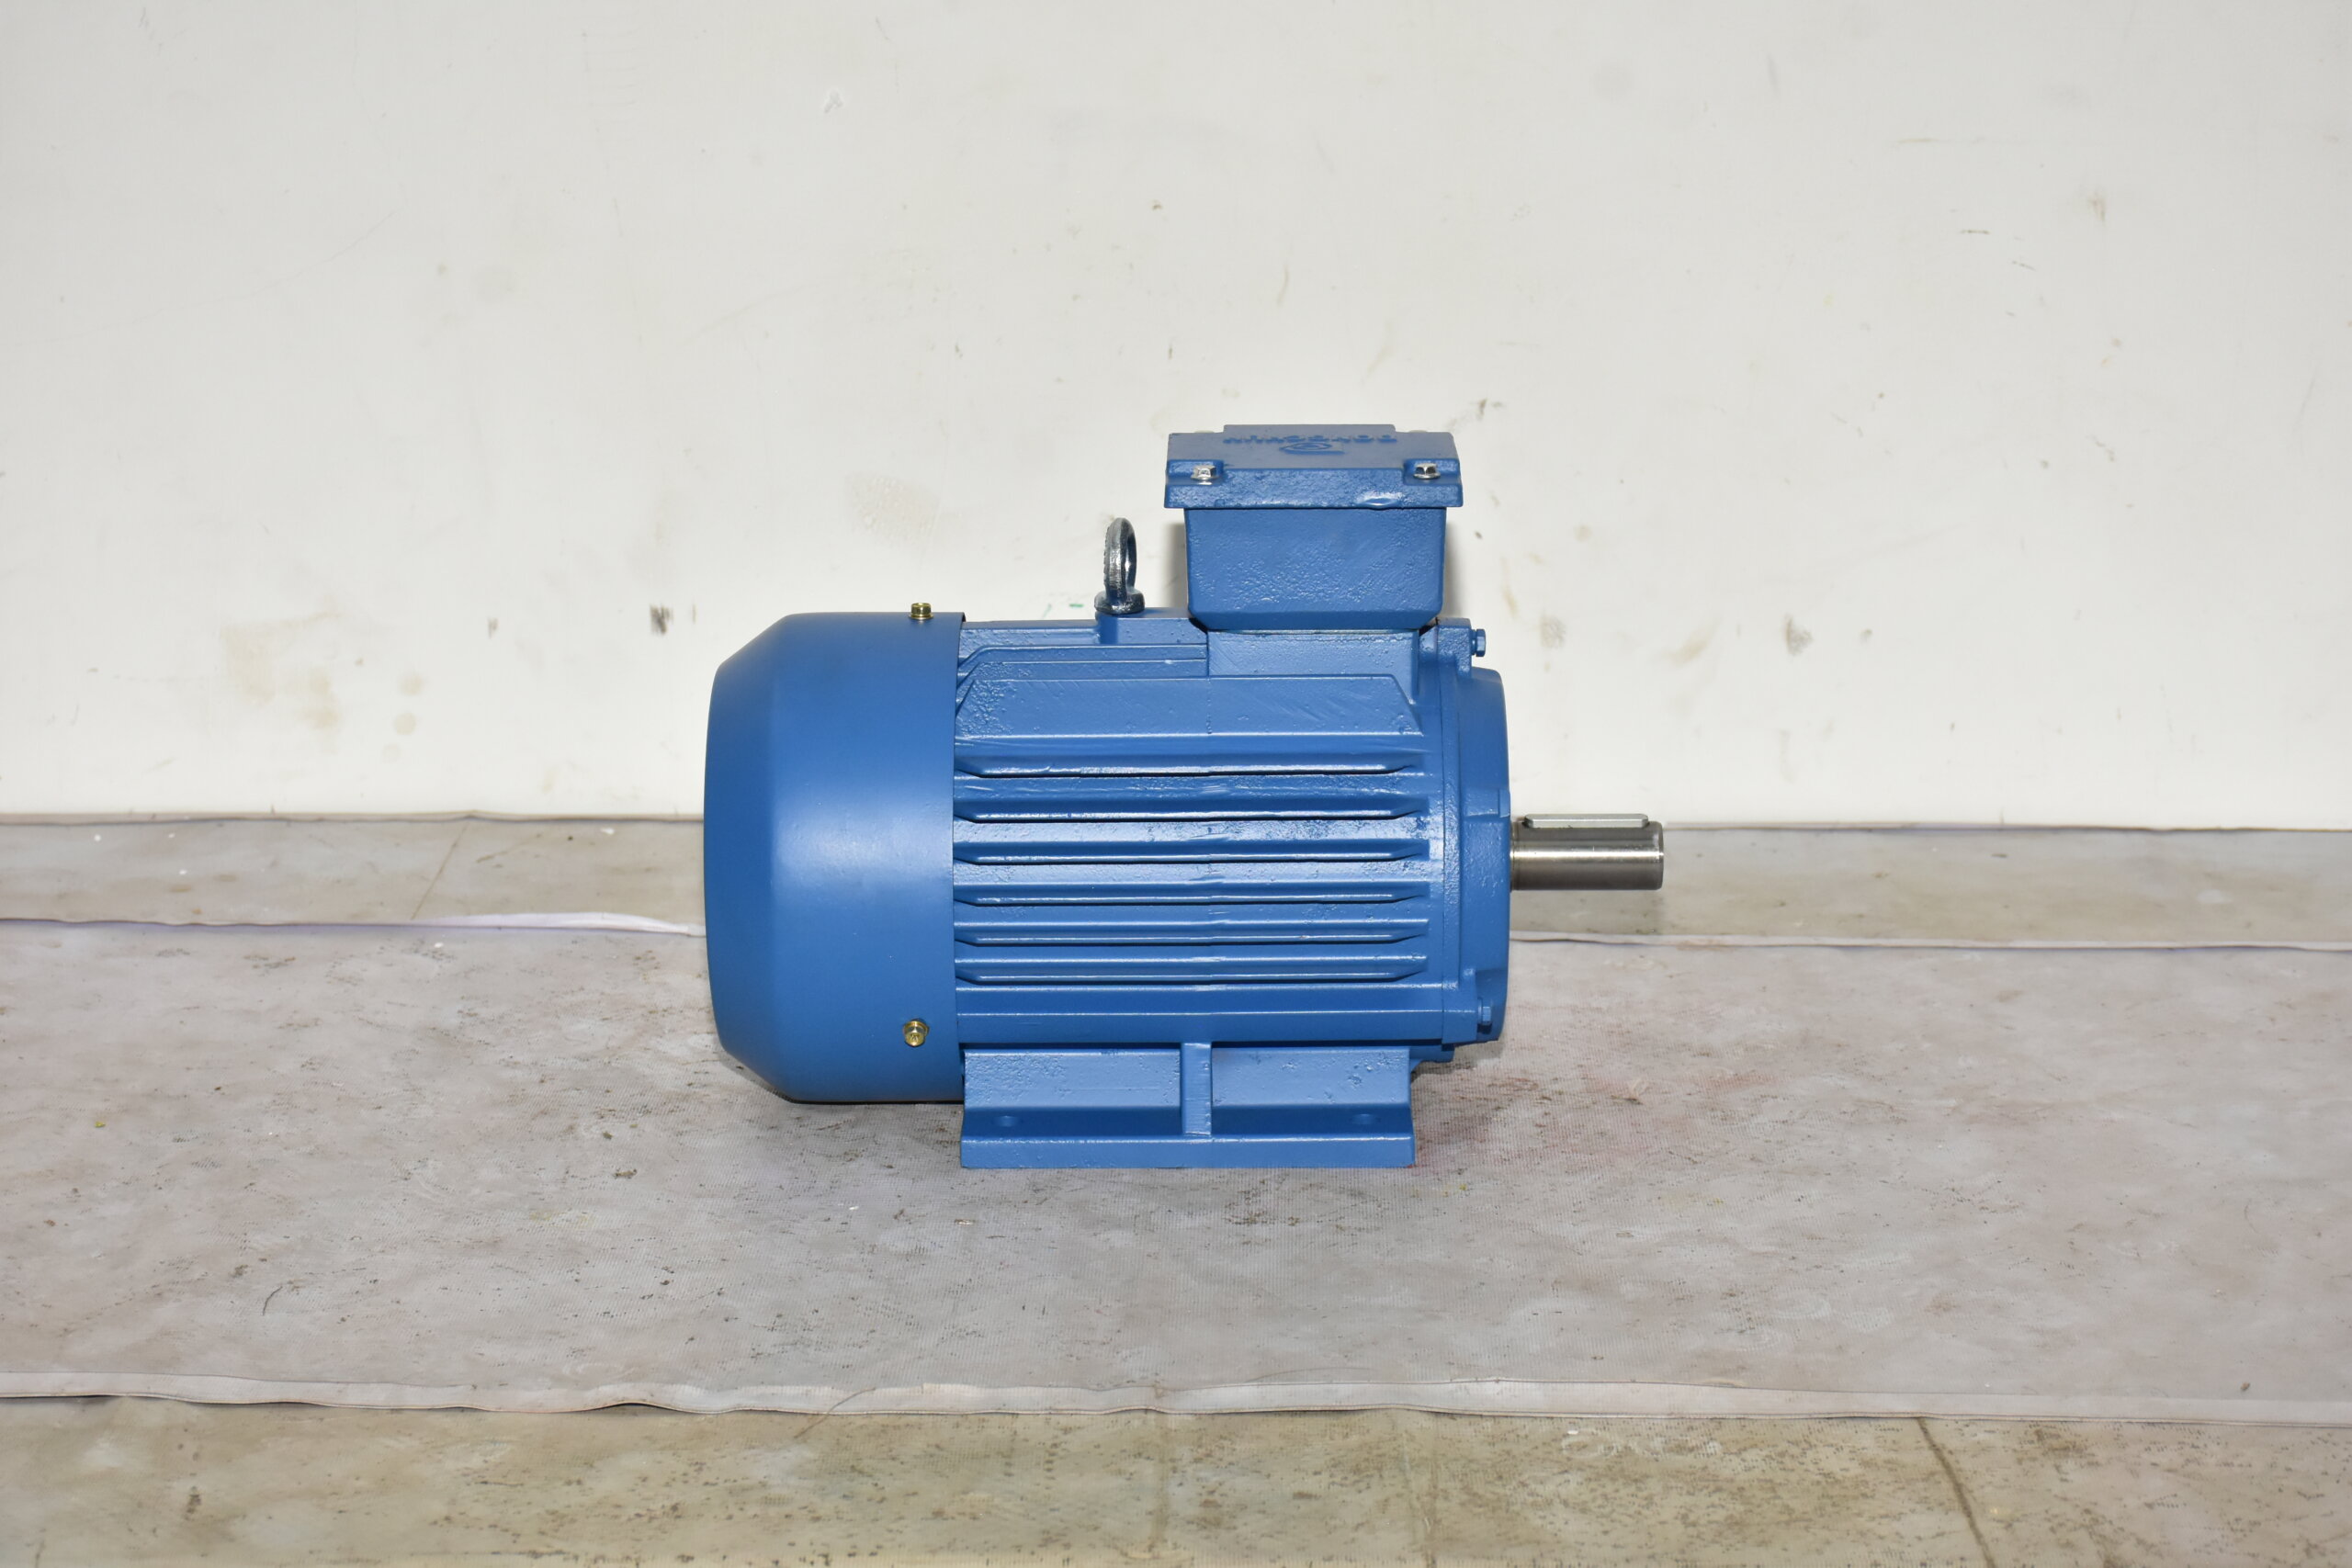 A three phase 50Hz 4 pole induction motor has a full speed of 1460